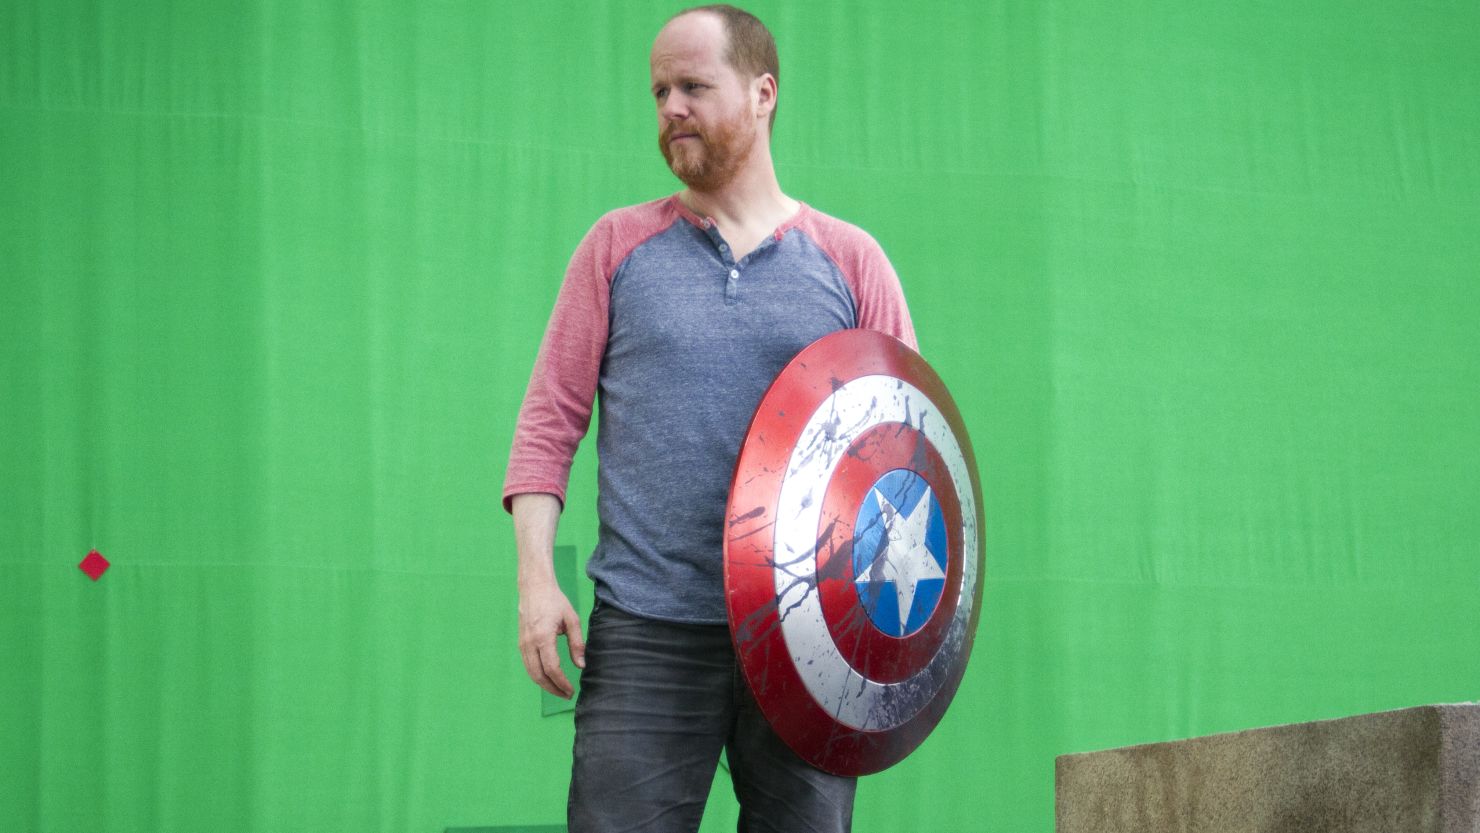 Joss Whedon see similarities in his hit film "The Avengers" and some classics.